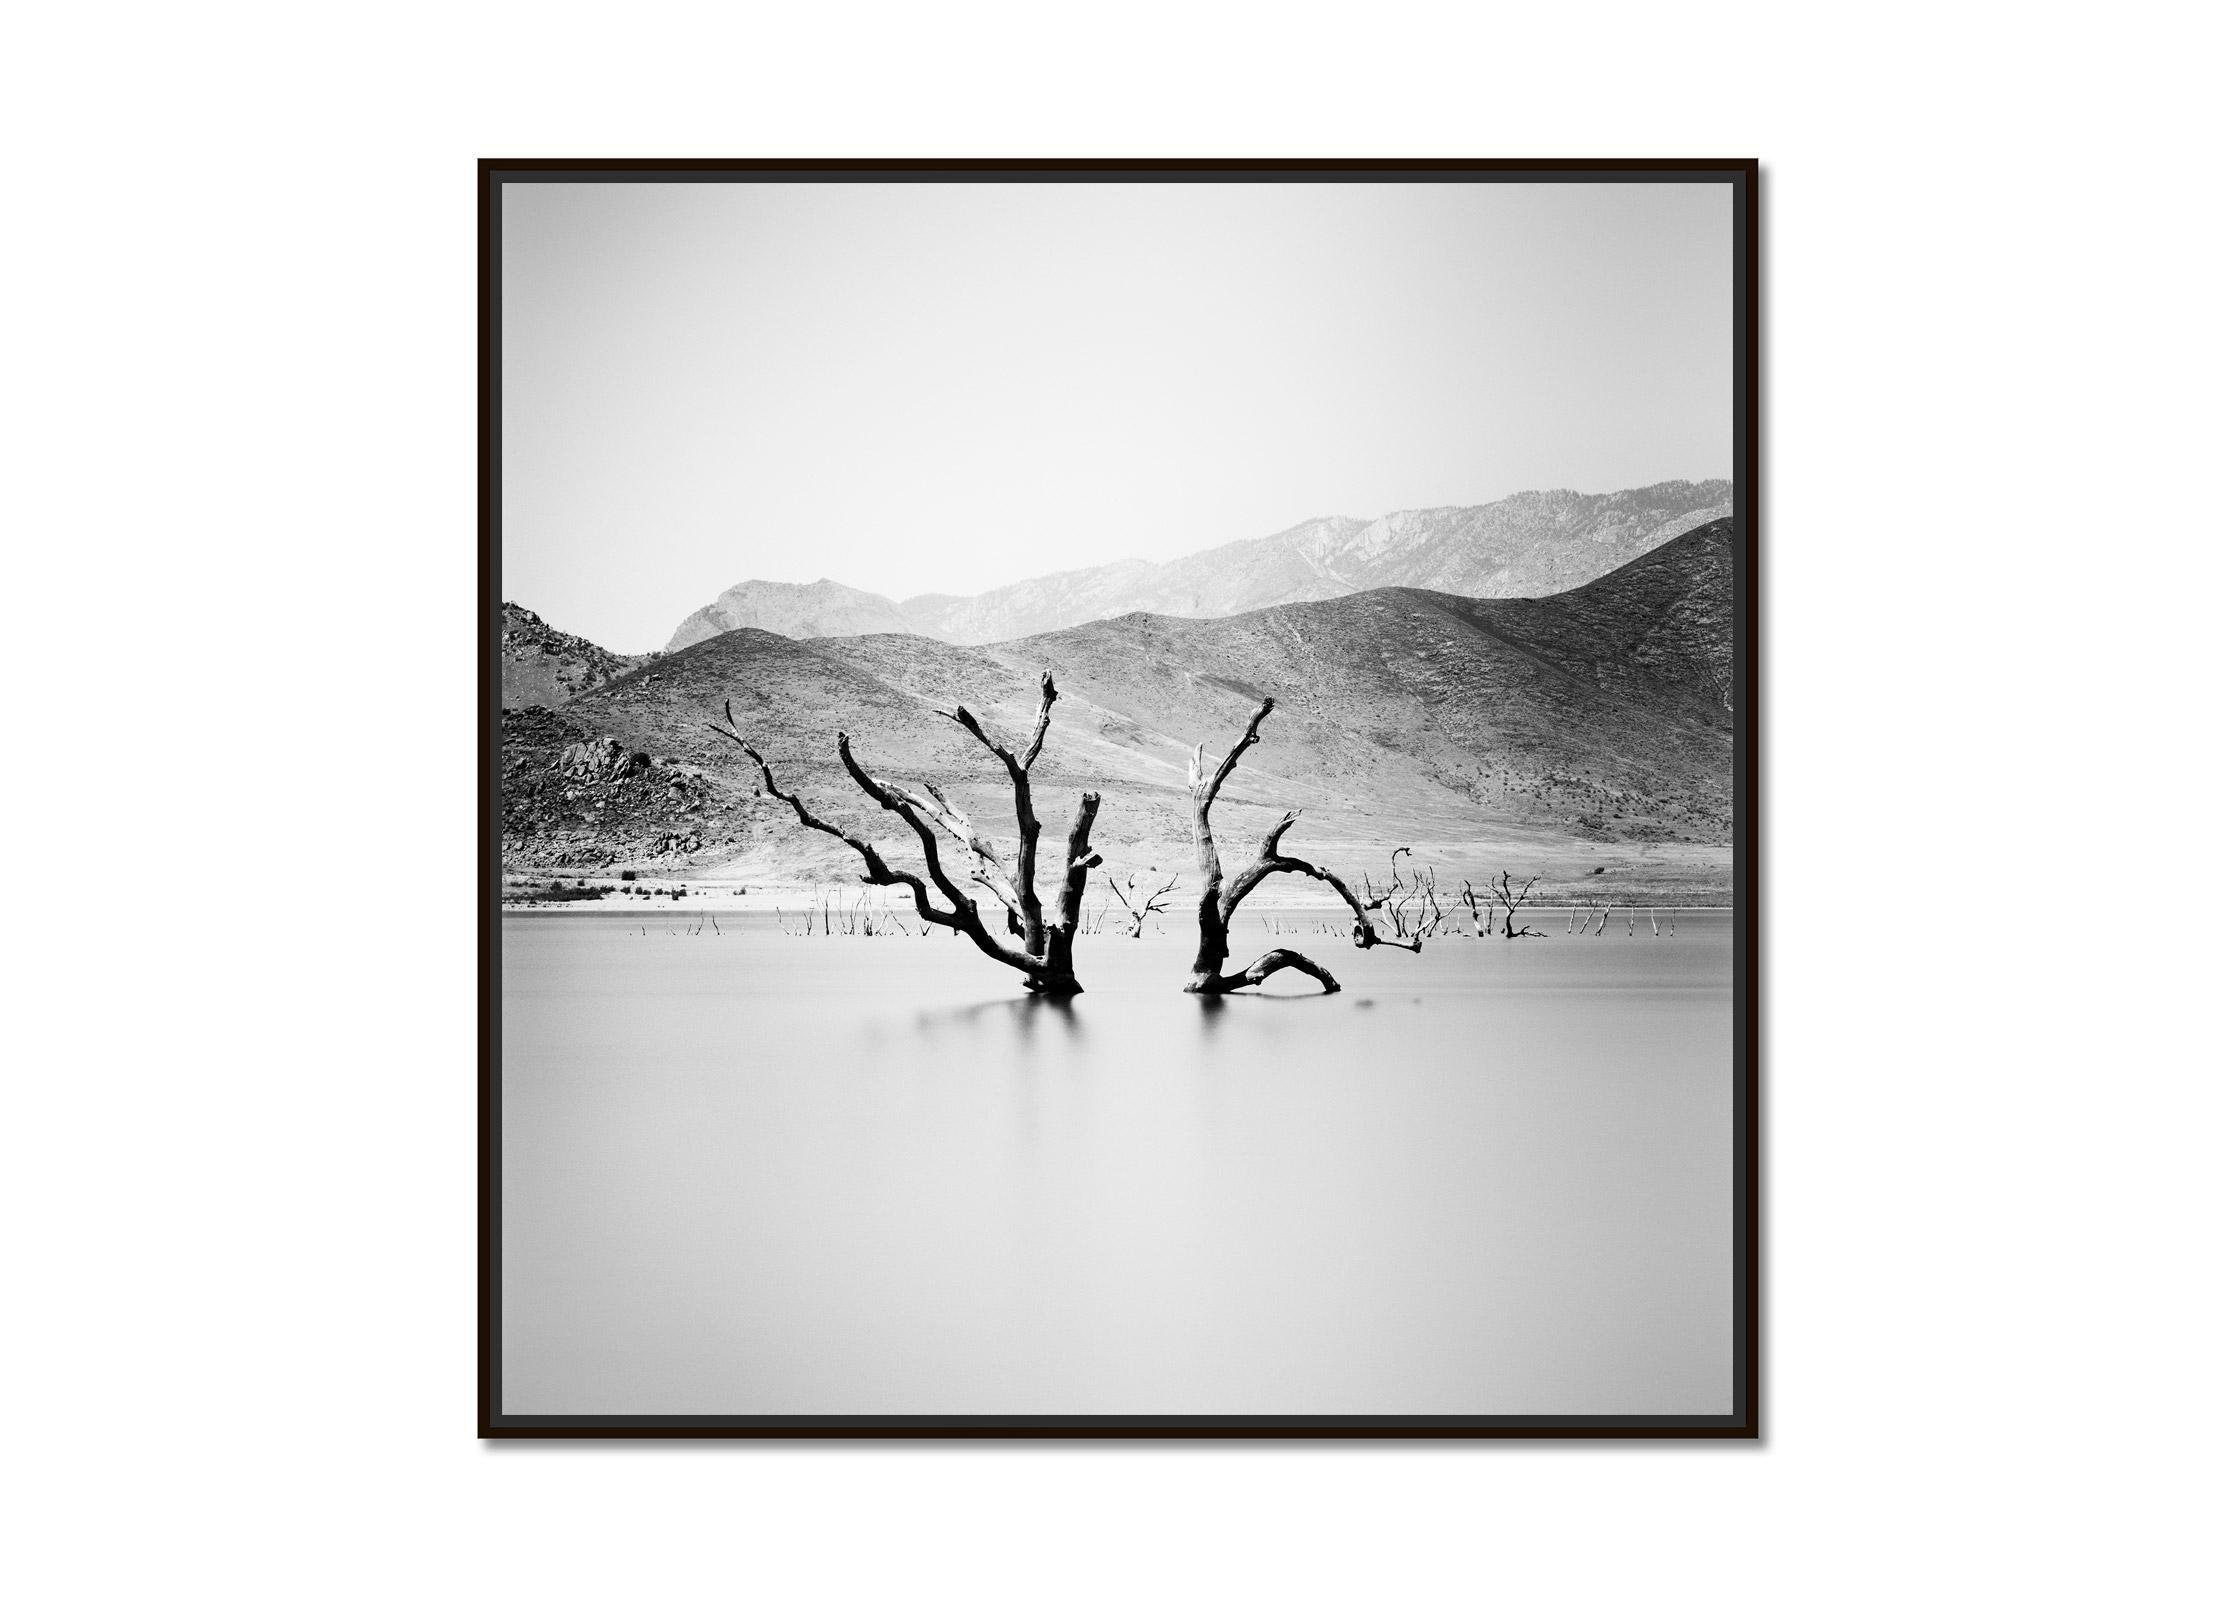 Artificial Lake, dead Tree, mountain, Arizona, USA, b&w landscape photography - Photograph by Gerald Berghammer